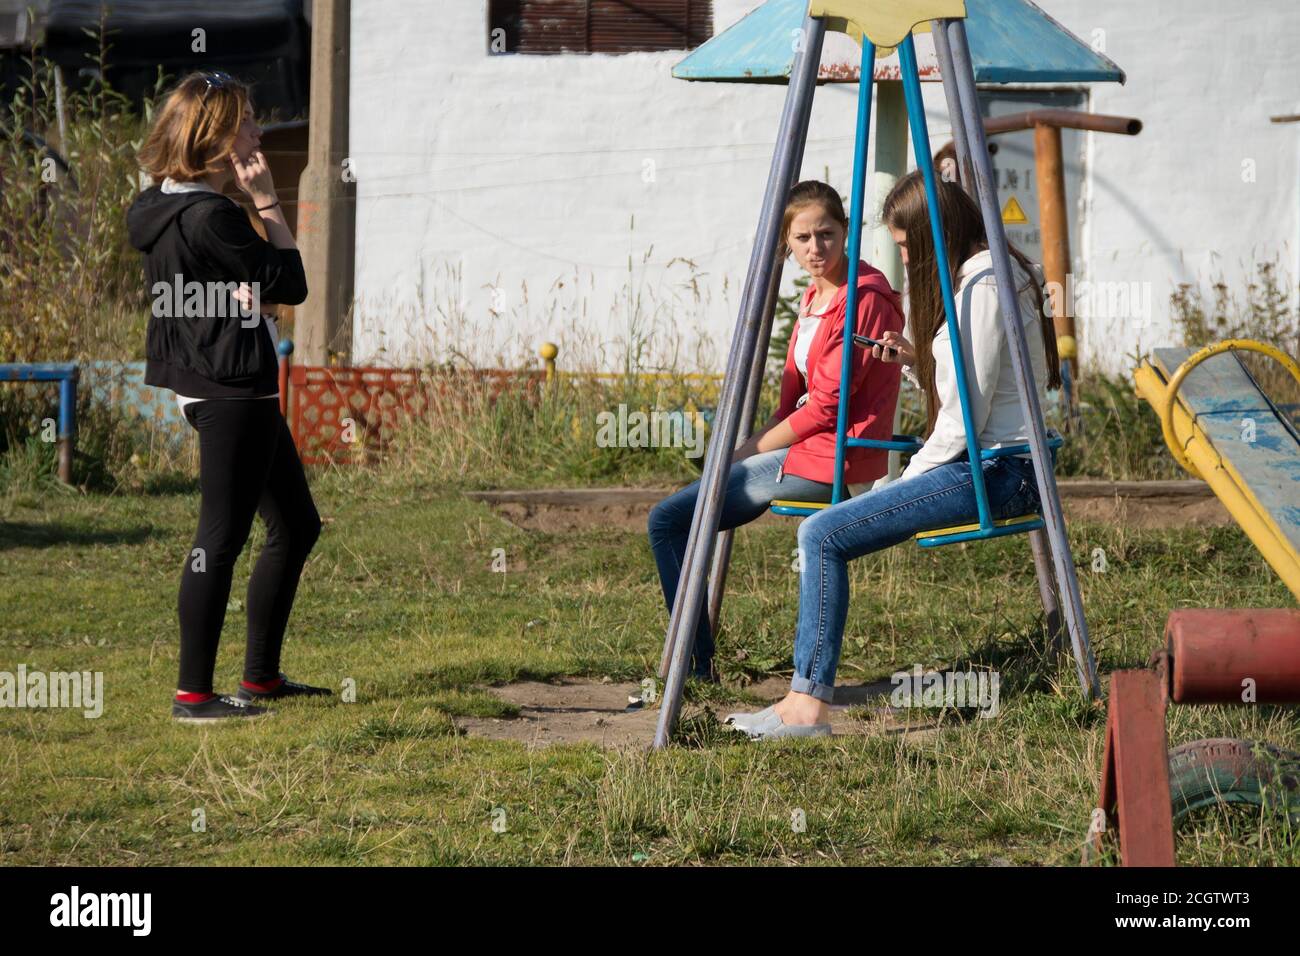 Teen girls communicate on the playground with cellphones in their hands in the courtyard of a residential building. Stock Photo